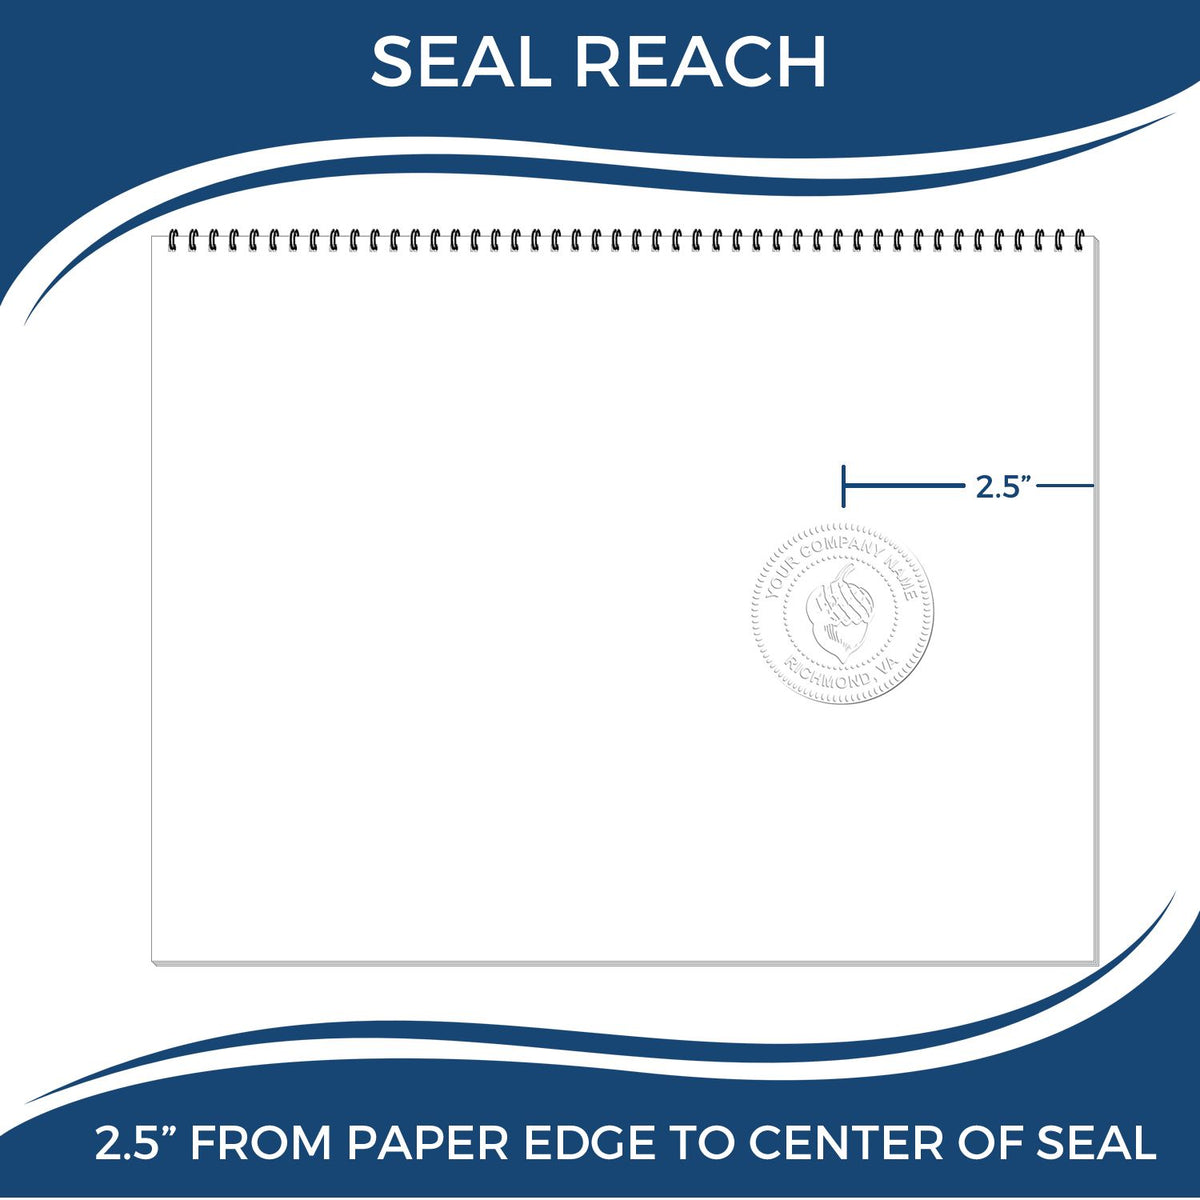 An infographic showing the seal reach which is represented by a ruler and a miniature seal image of the Heavy Duty Cast Iron Nevada Architect Embosser